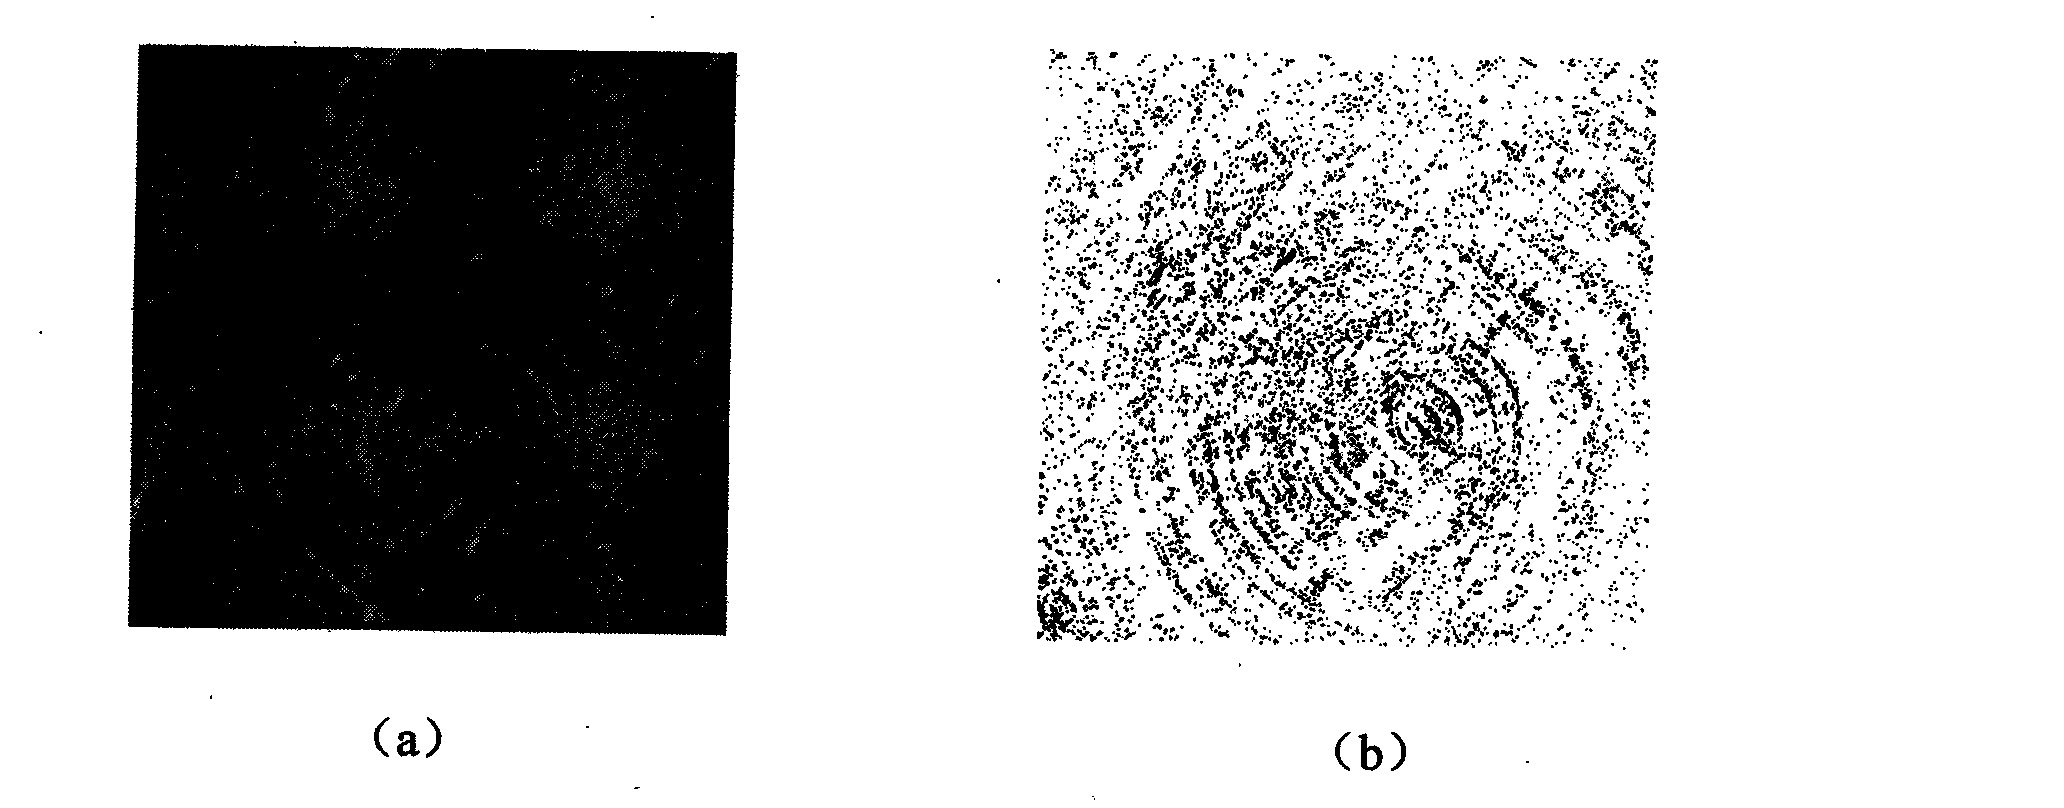 Method for analyzing pore structure of solid material based on microscopic image